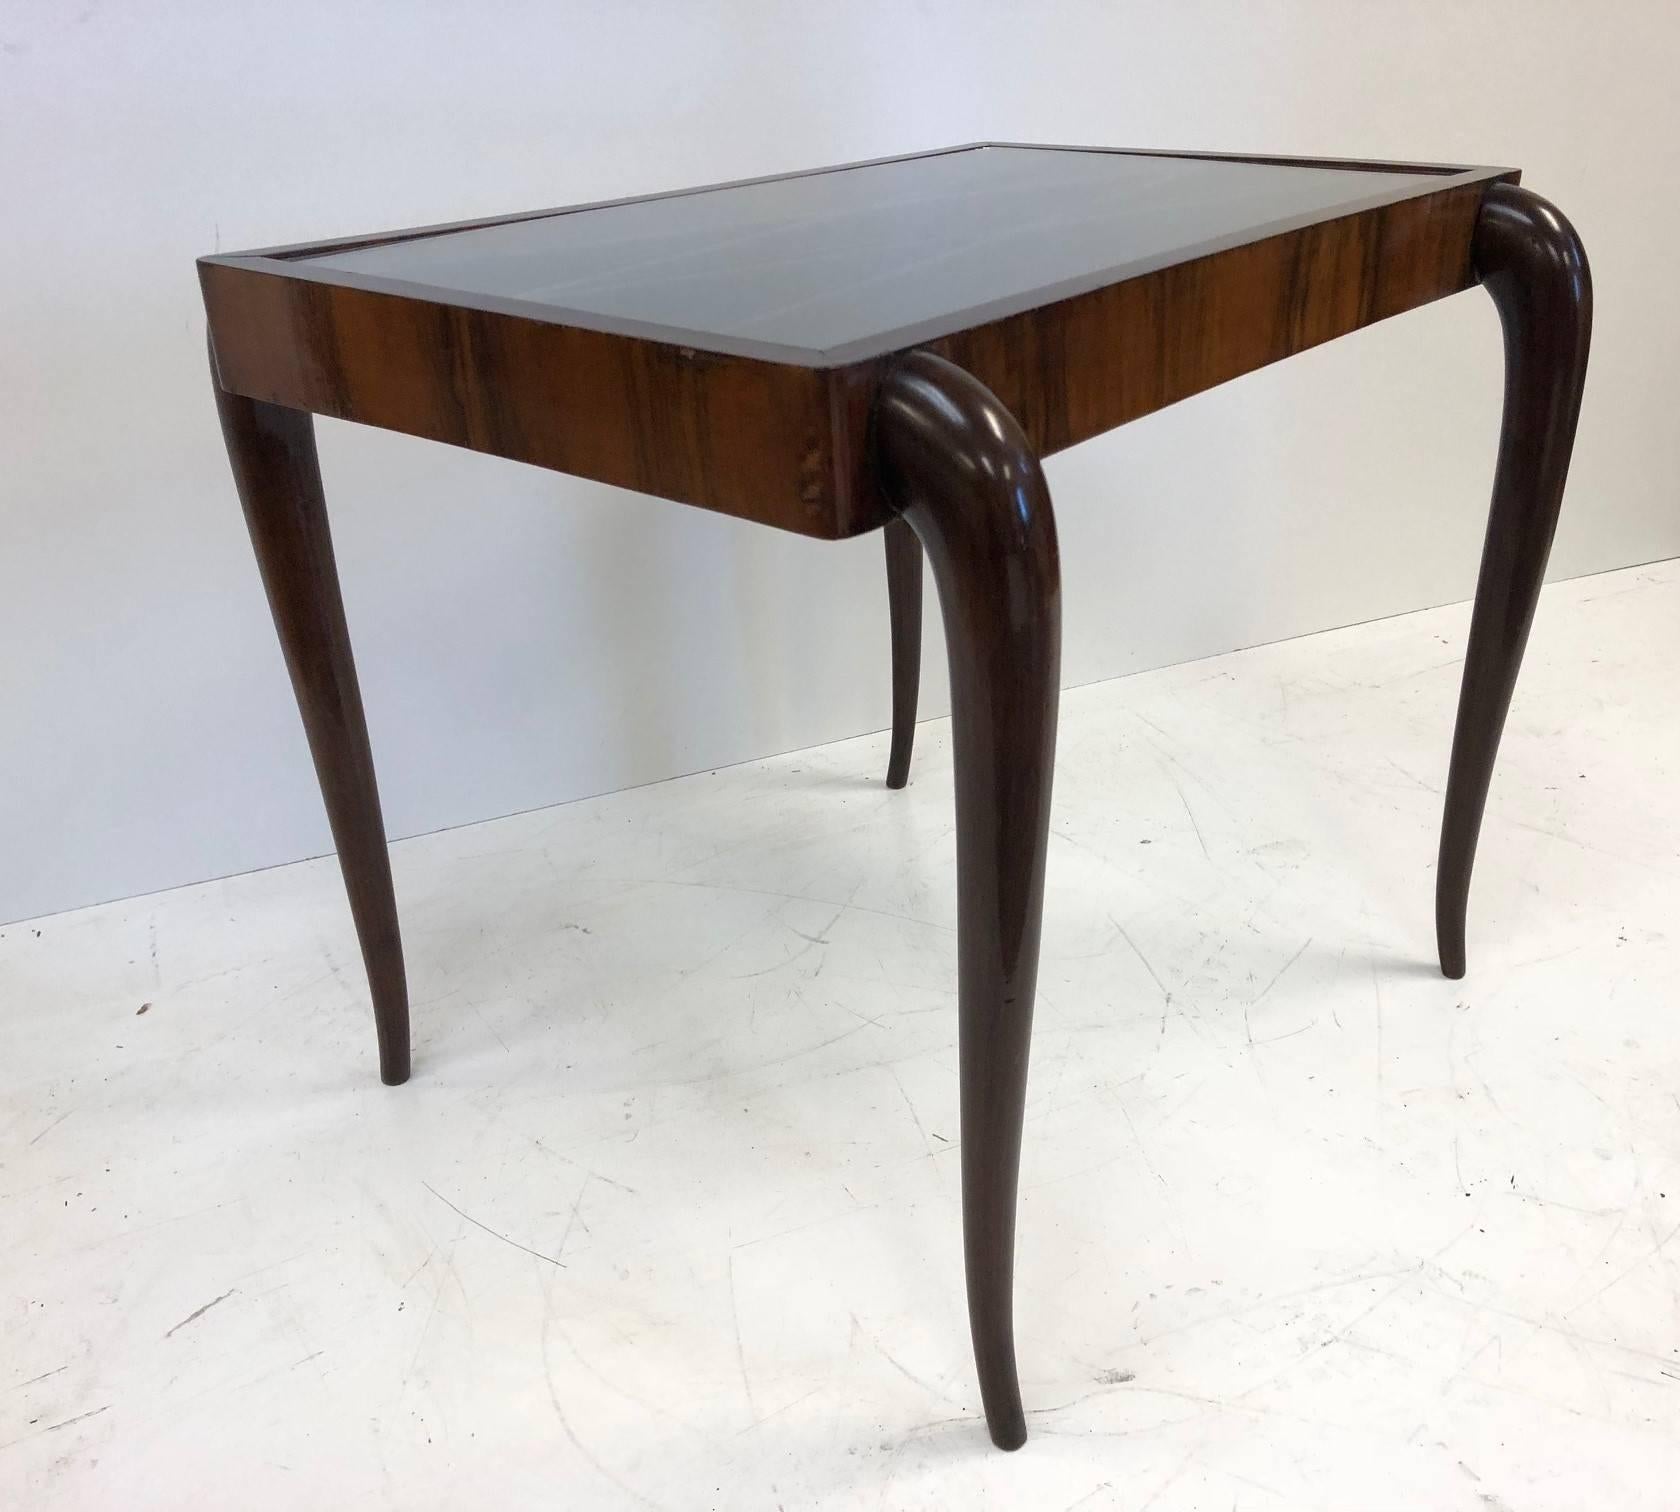 Italian modern mahogany side table in the style of Paolo Buffa. The table is mahogany with a glass and lattice patterned top.